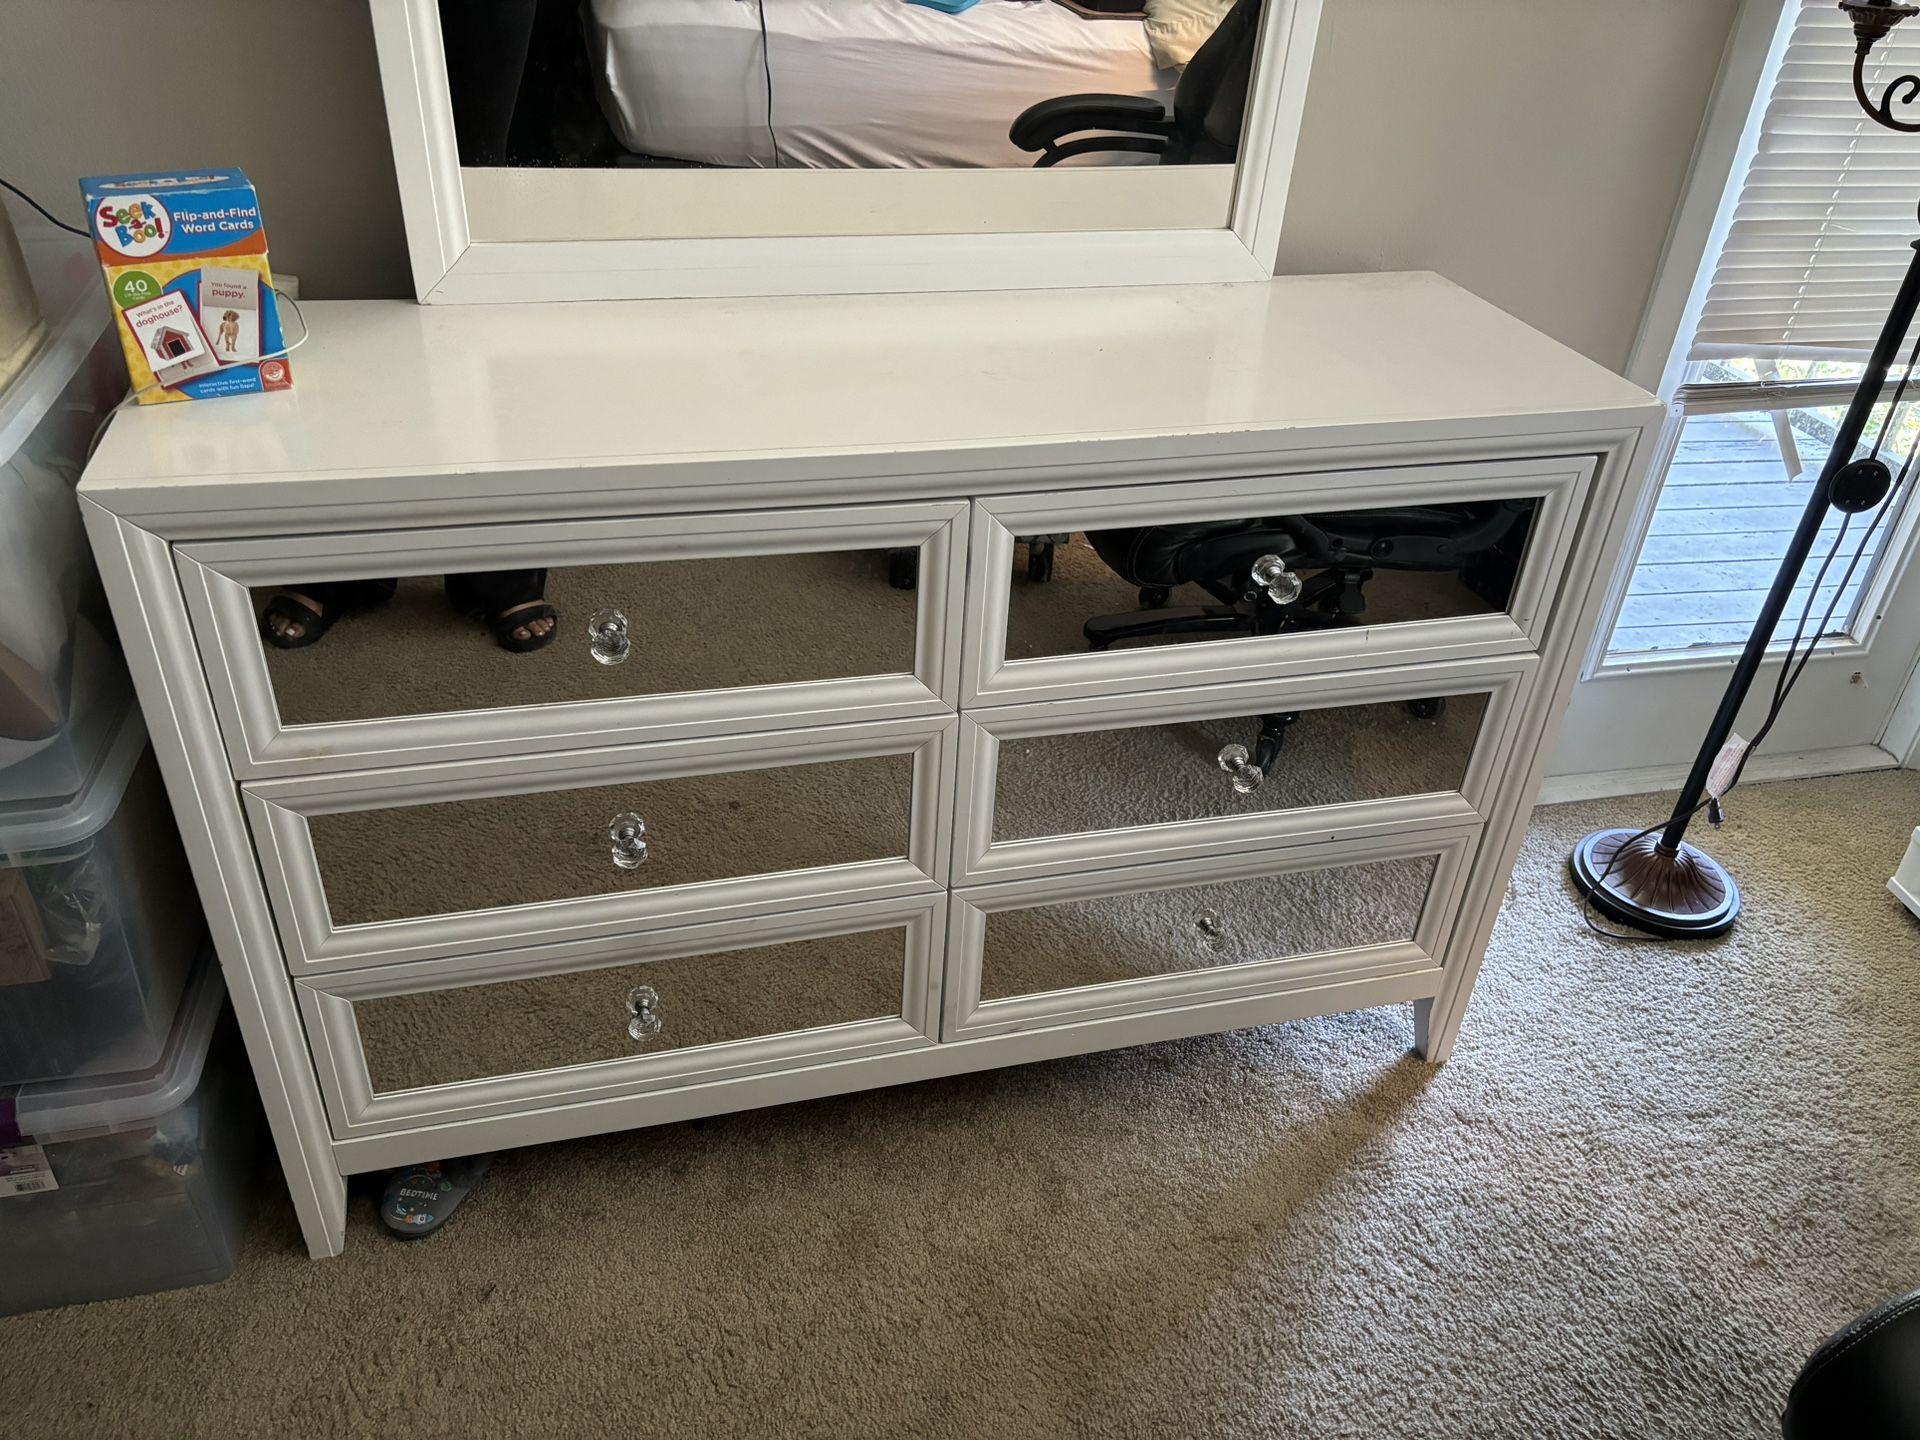 6 Drawer Dresser With Mirror And Matching Nightstand 